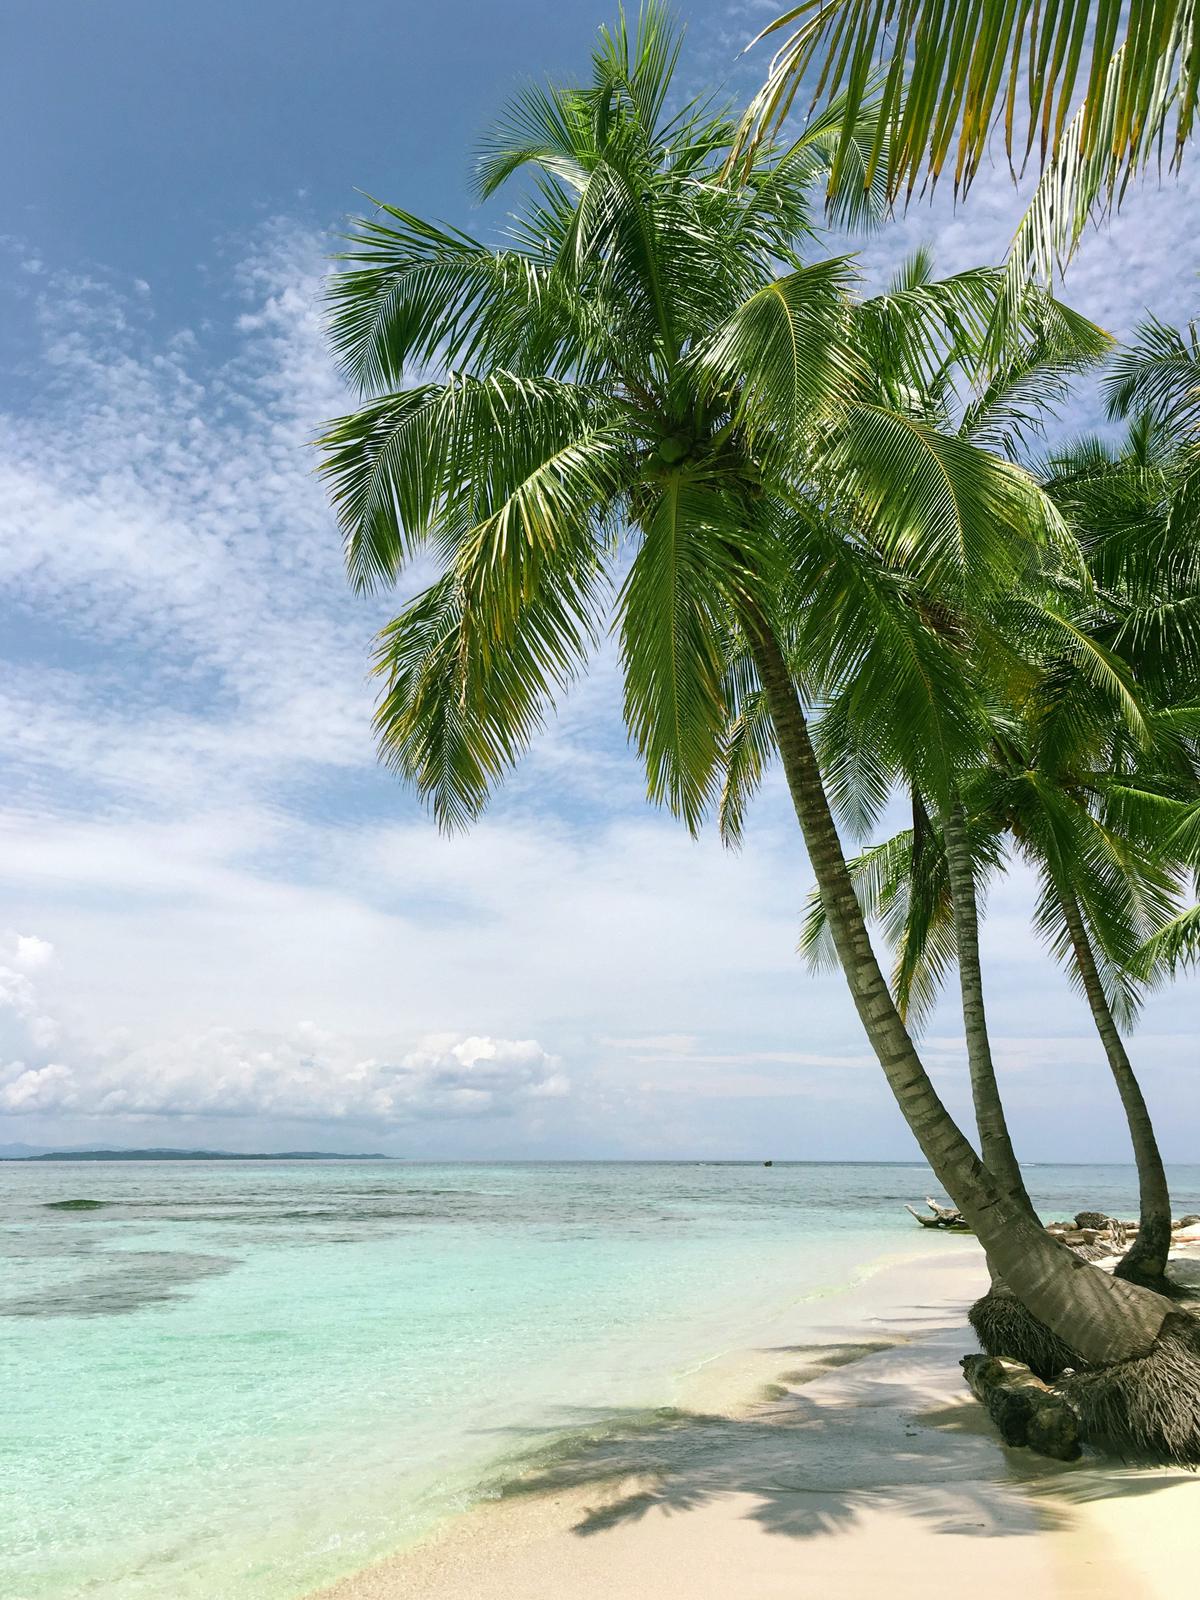 An image of a palm tree with a beautiful beach in the background